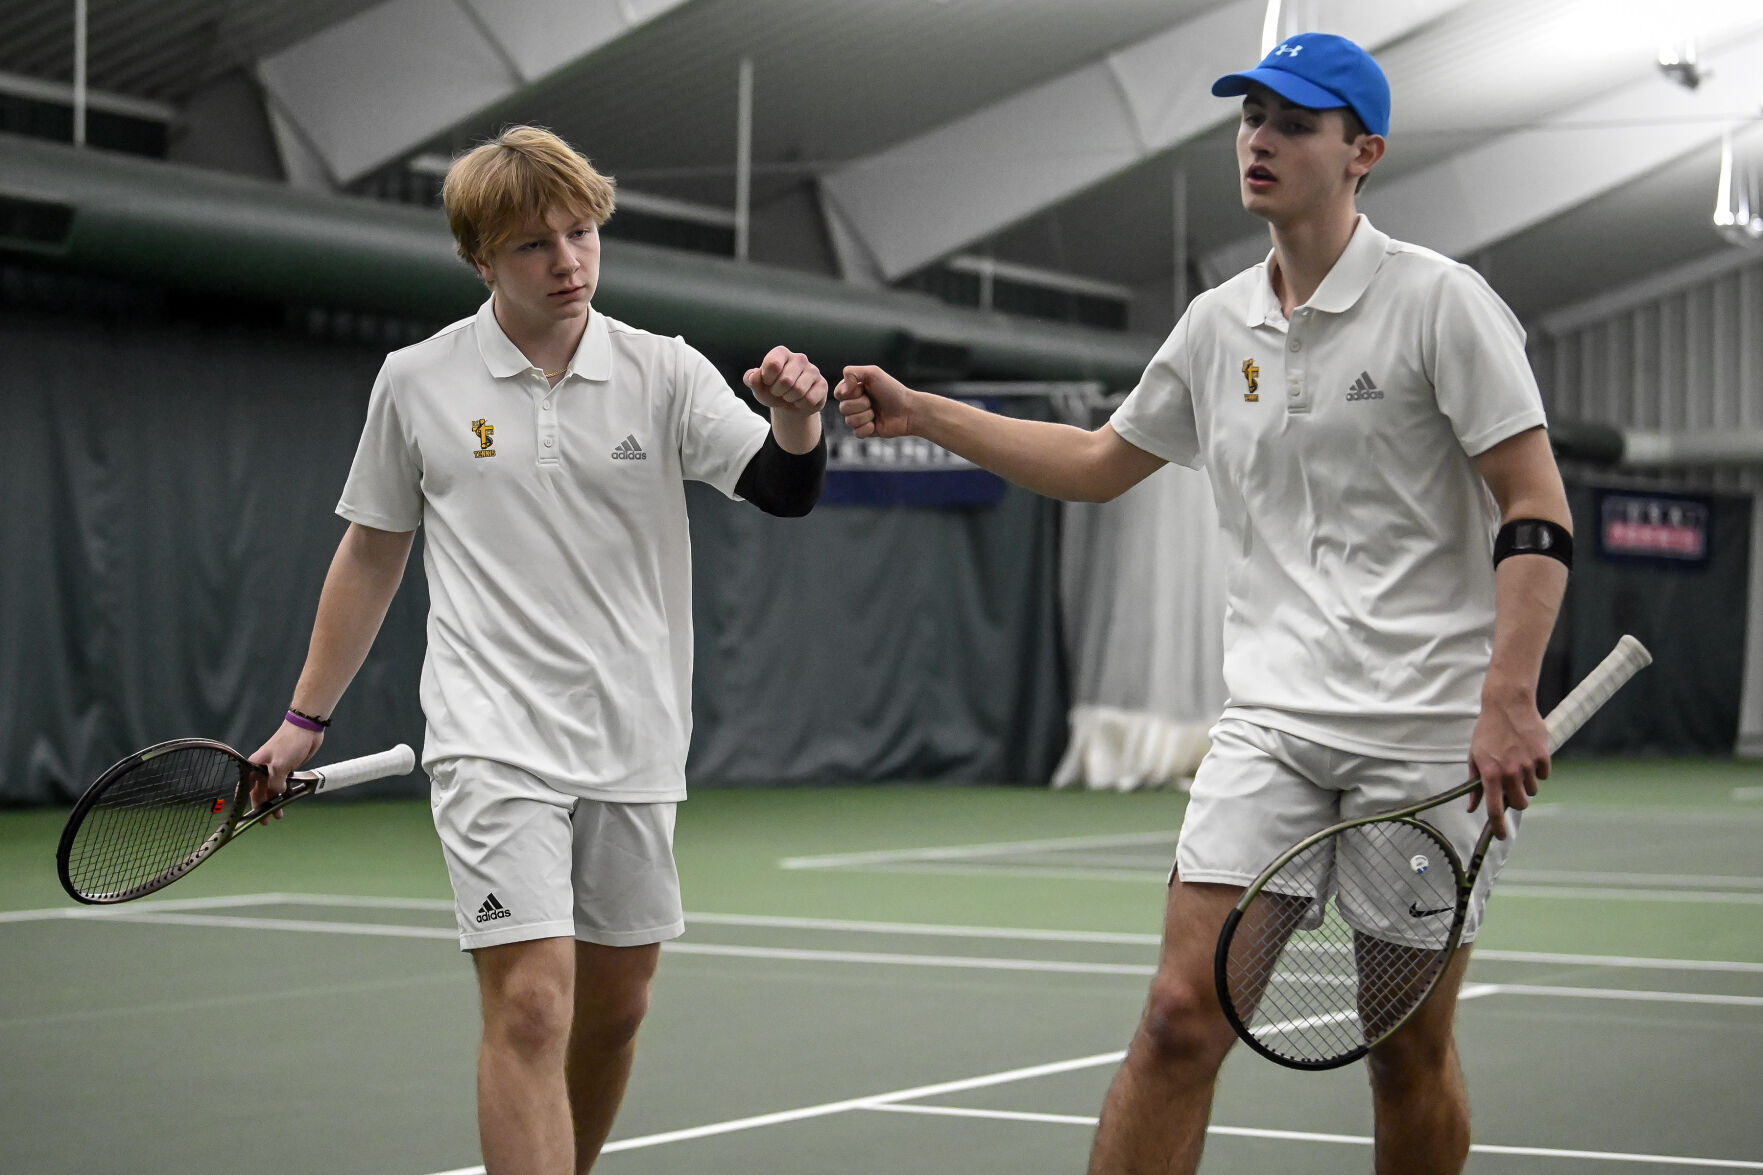 Rapid City Christian boys tennis in prime position this season for first state title